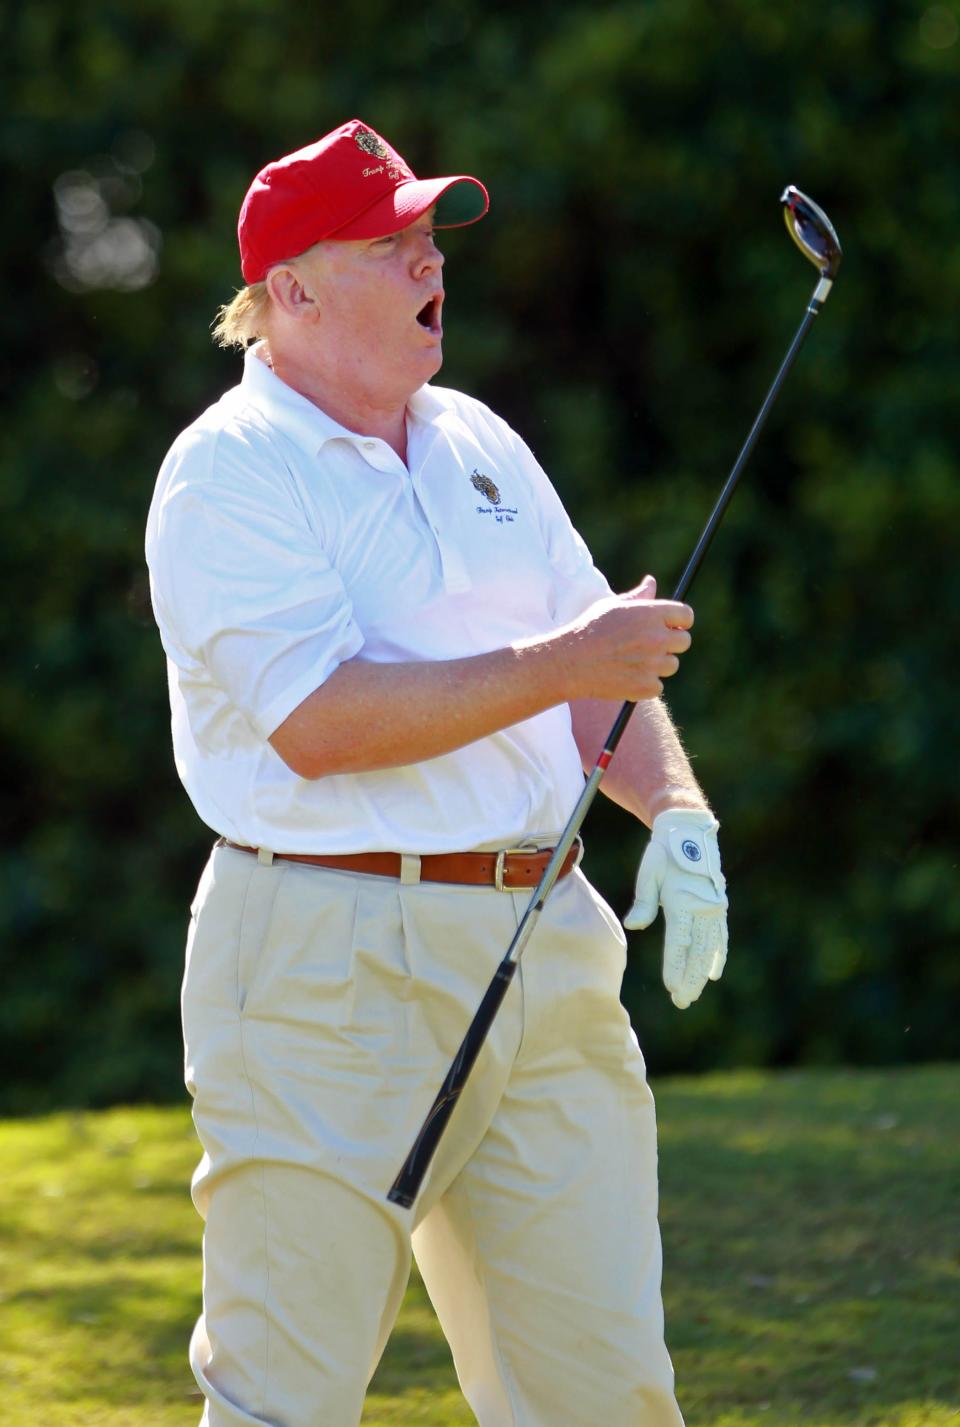 Former president Donald Trump reacts to a shot during a round of golf.